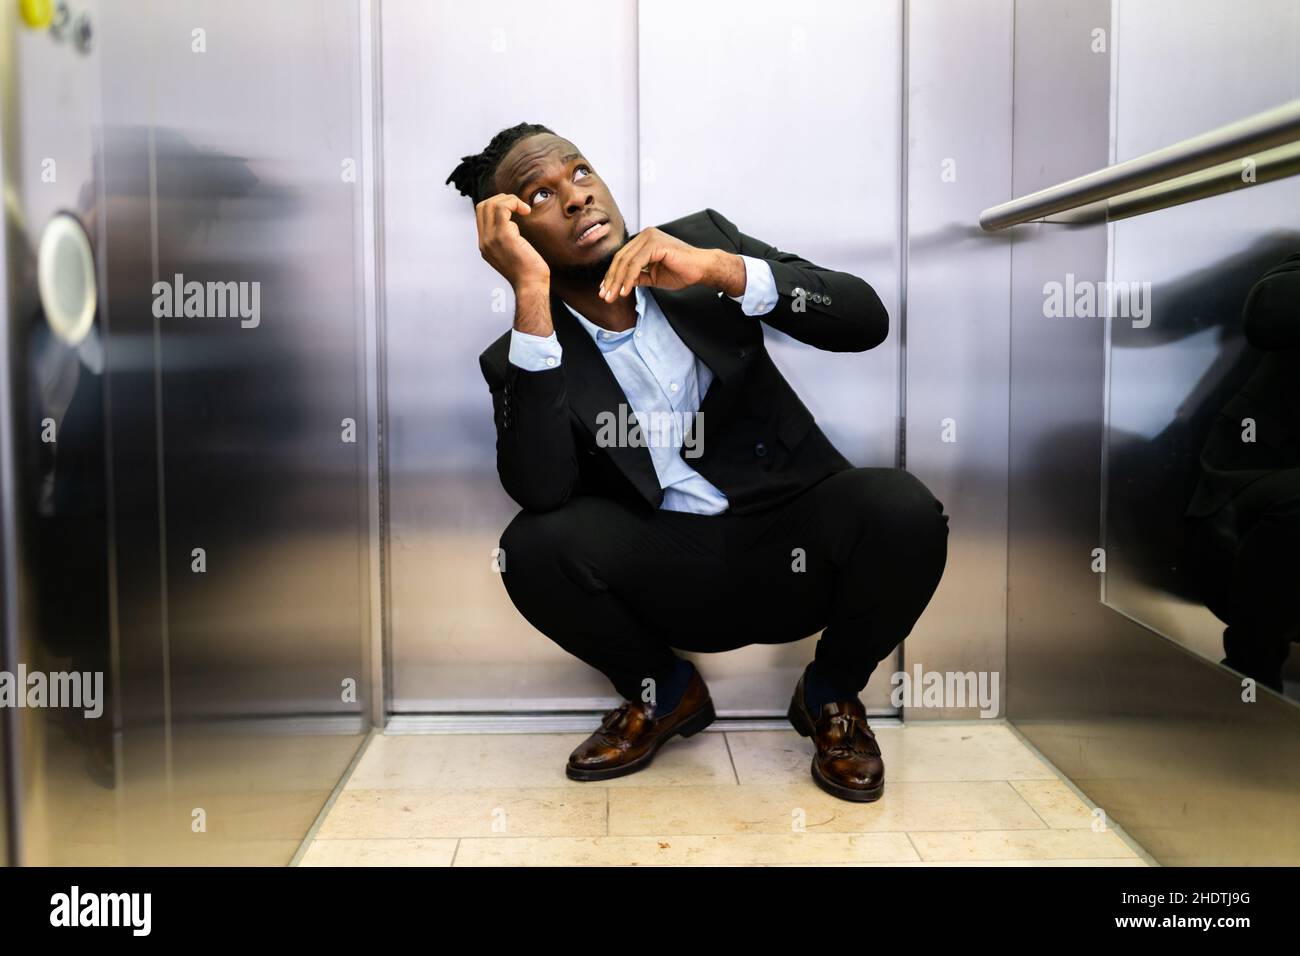 Trapped Or Stuck Inside Elevator. Fear And Agoraphobia Stock Photo